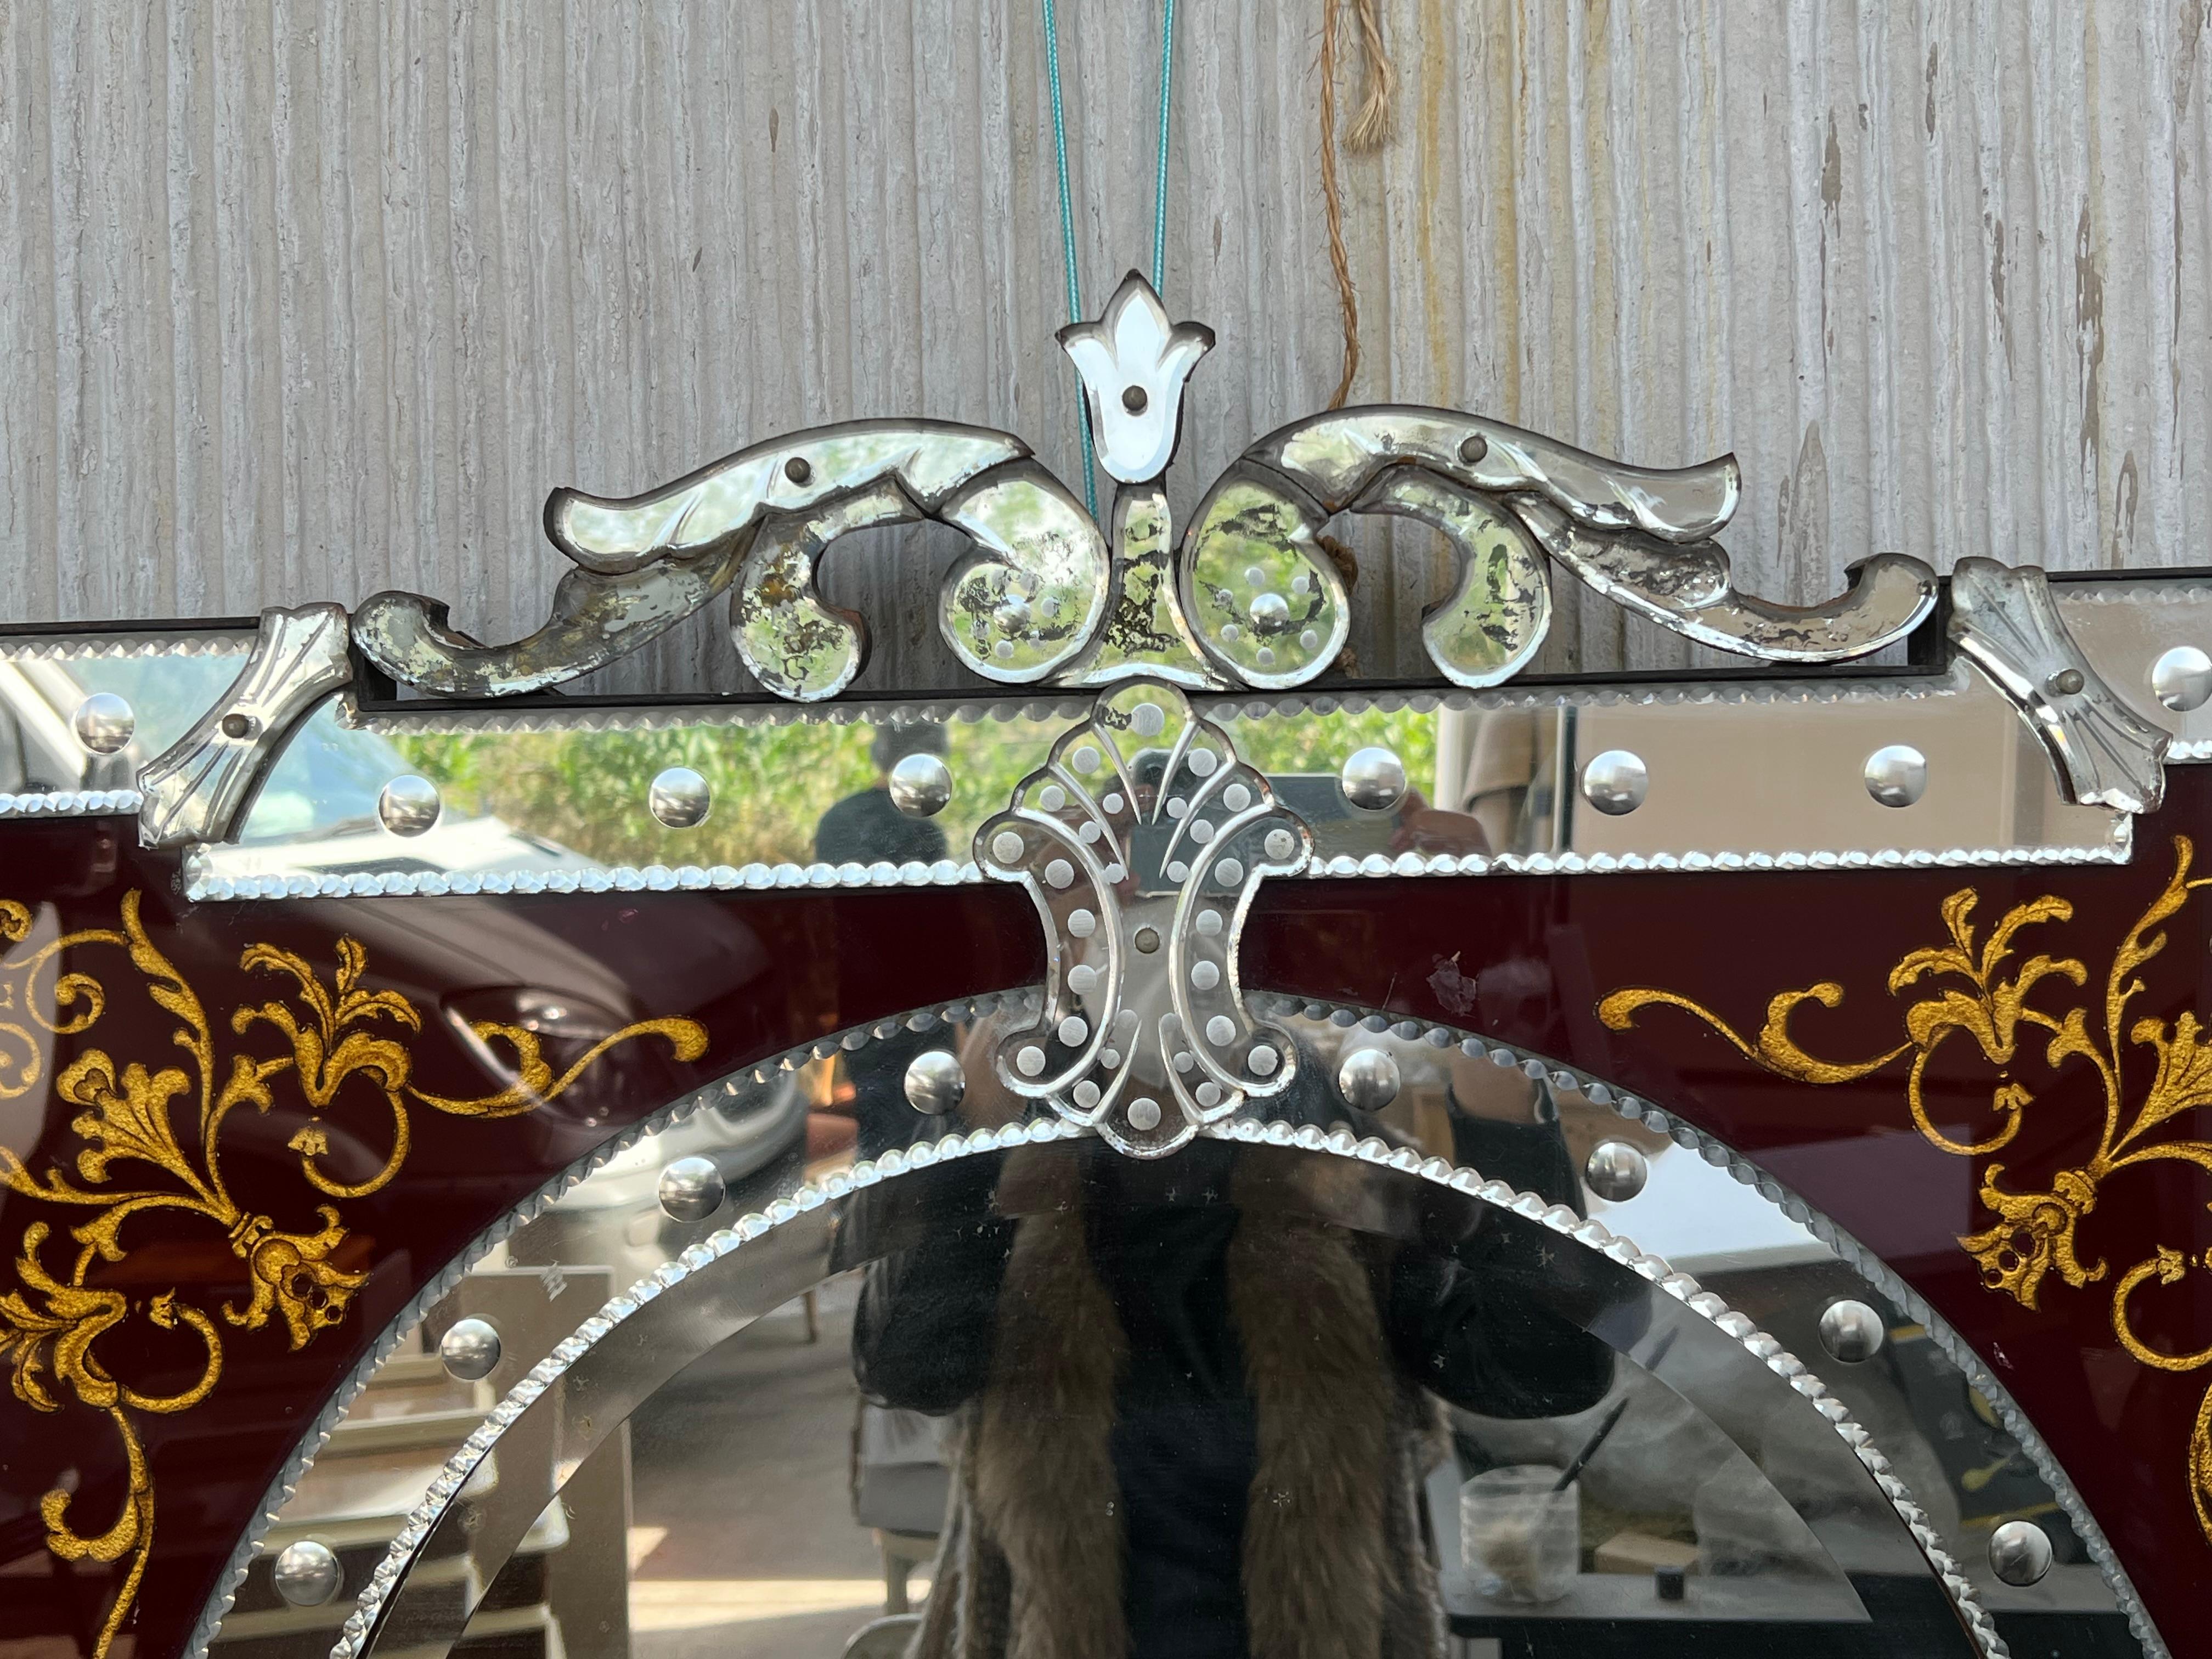 1880-1900 Venetian Mirror with Pediment Garnet Glass Adorned with Flowers In Good Condition For Sale In Miami, FL